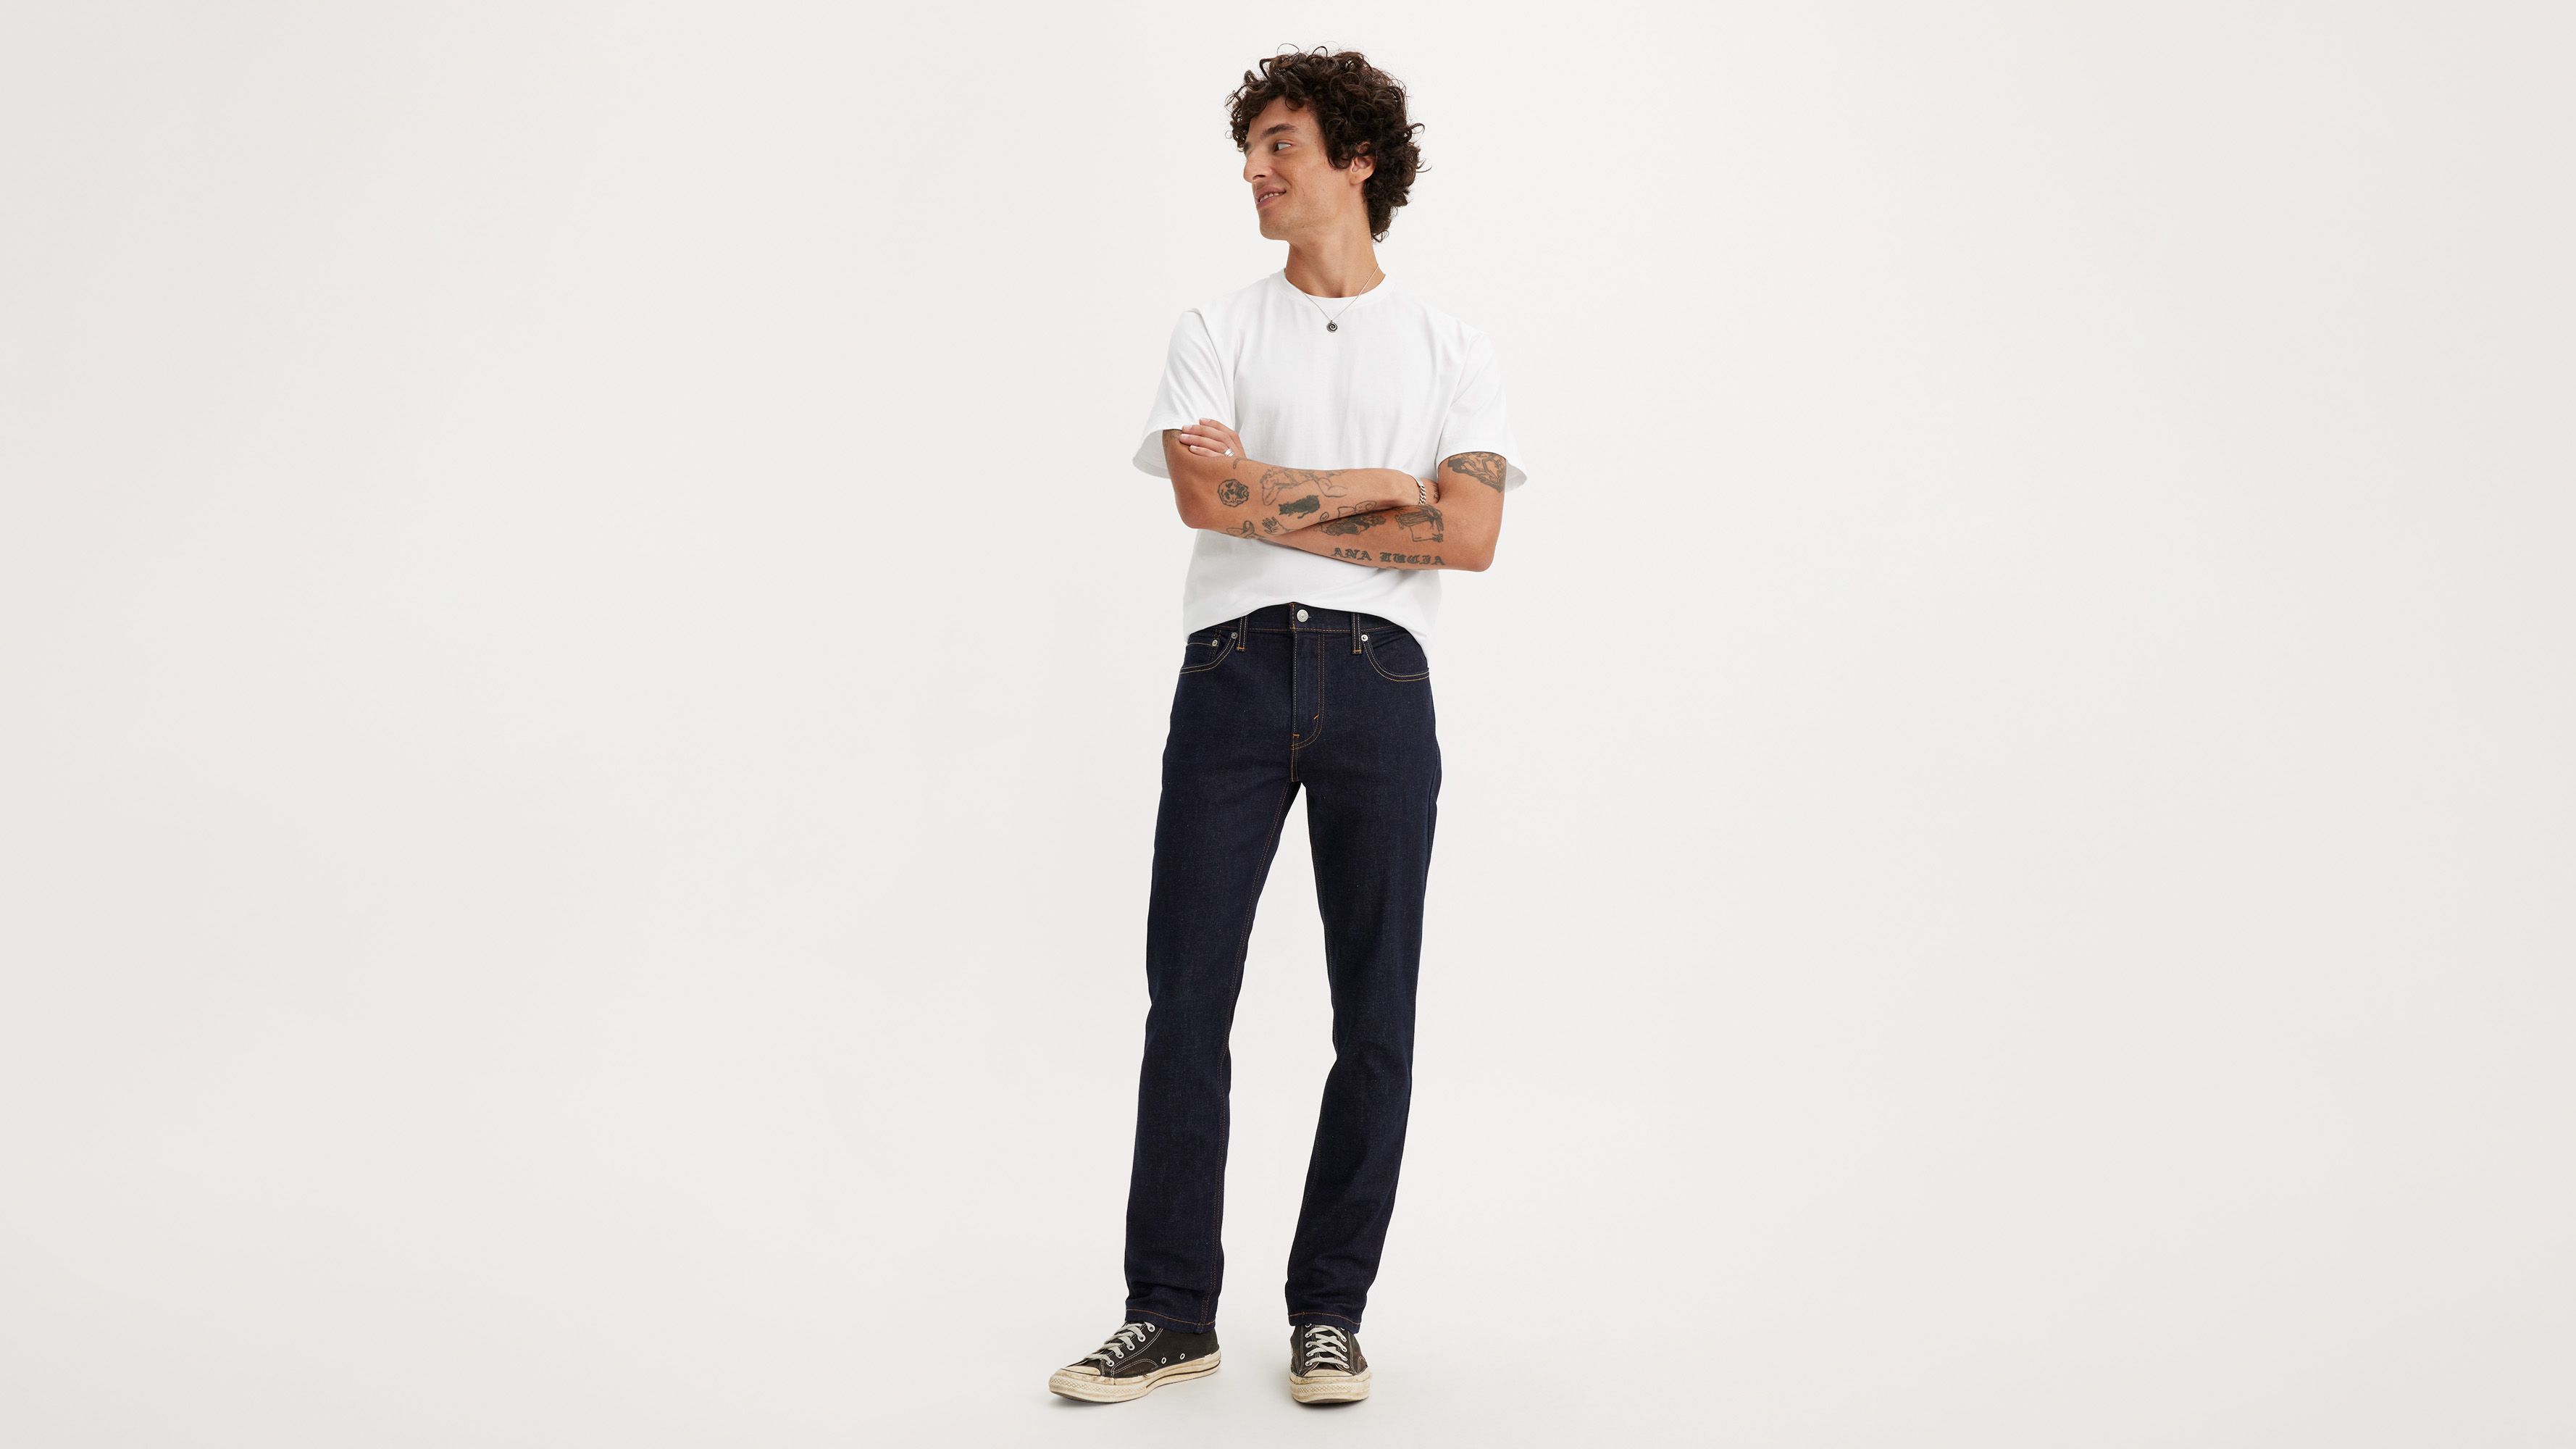 sell levis